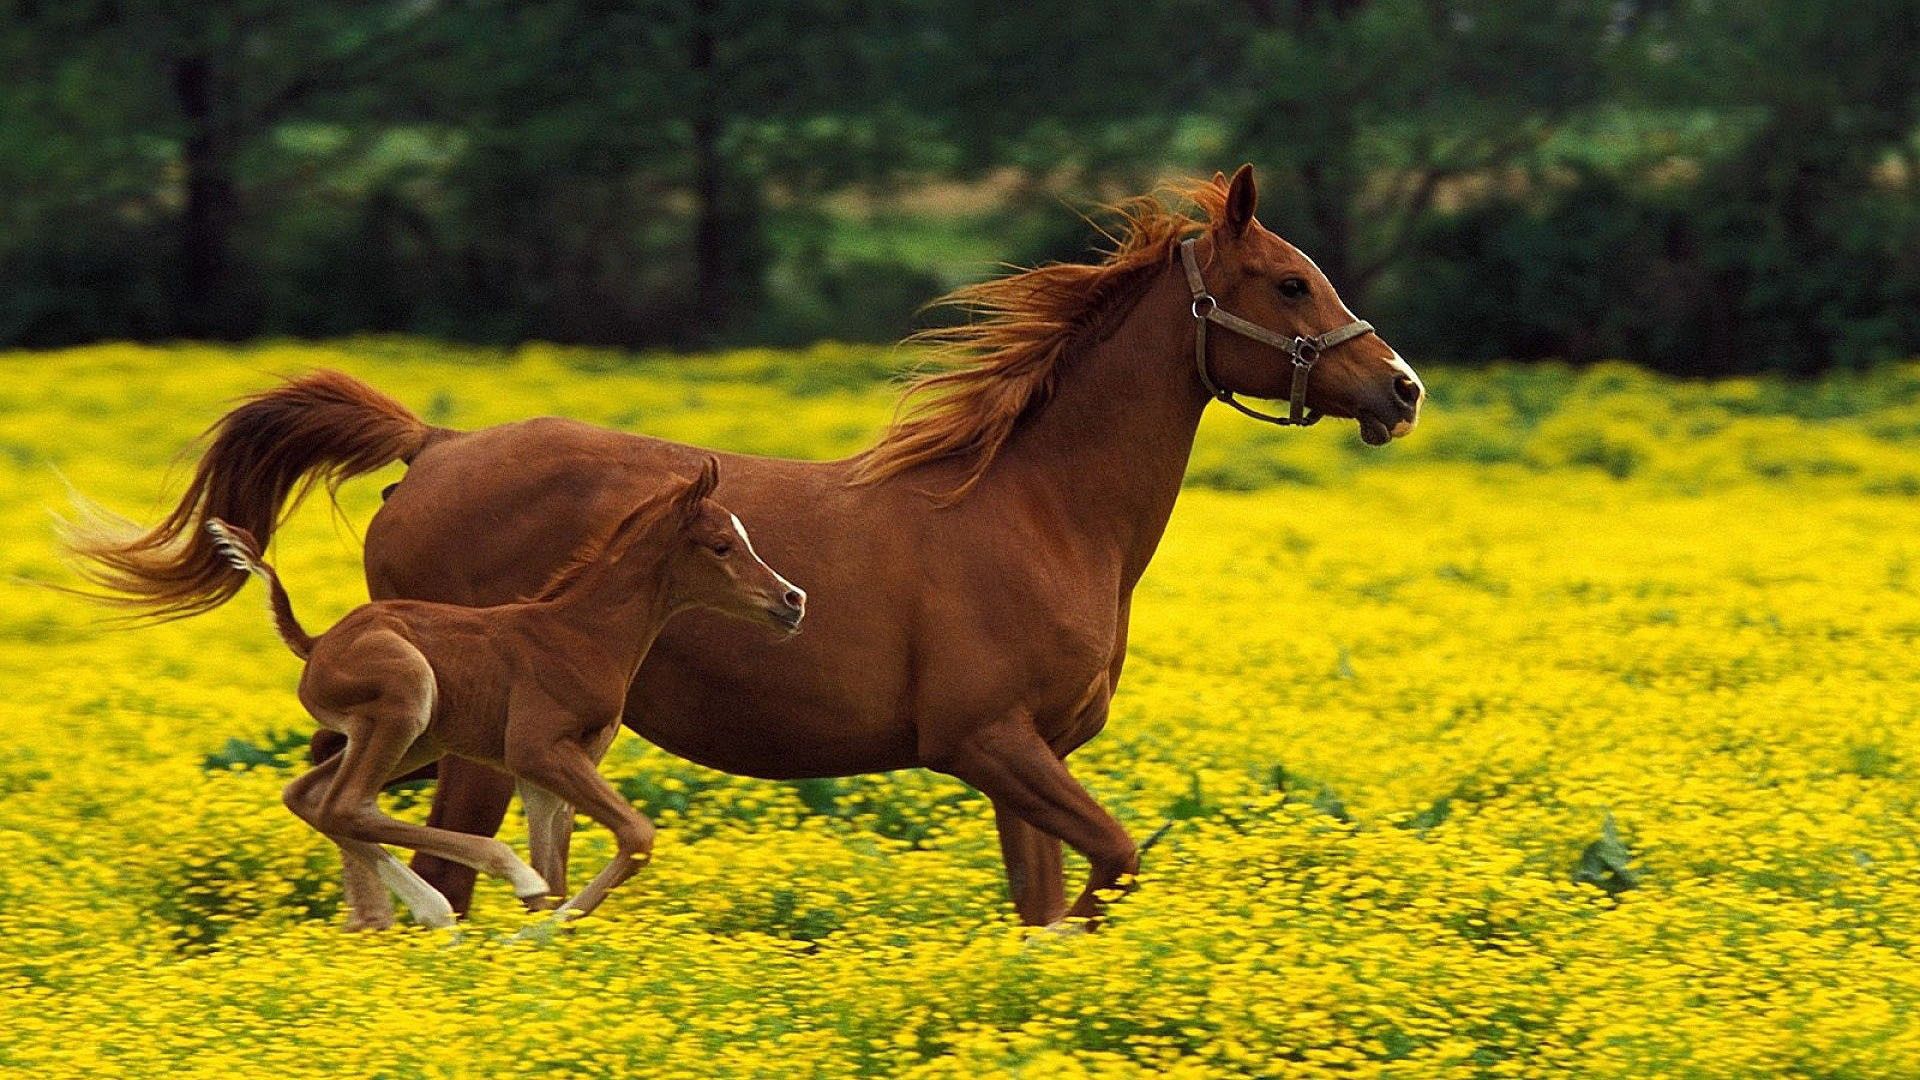 Mobile wallpaper: Stallion, Grass, Bounce, Jump, Animals, Flight, Run,  Horse, Family, Running, 115016 download the picture for free.